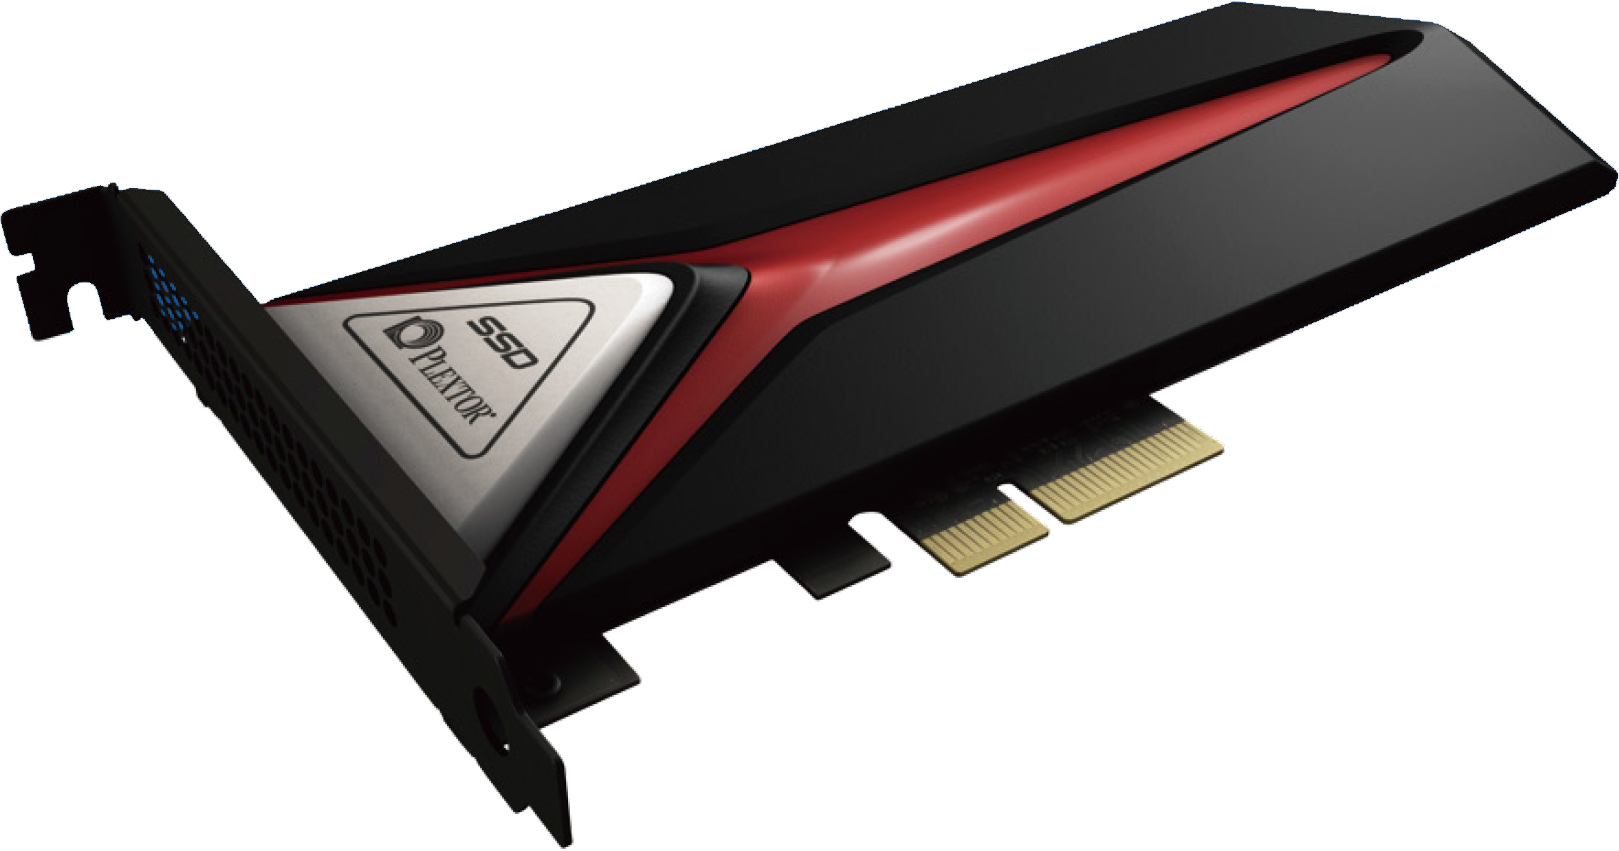 Plextor to Demonstrate M8Pe Flagship SSD, EX1 USB Type-C SSD at